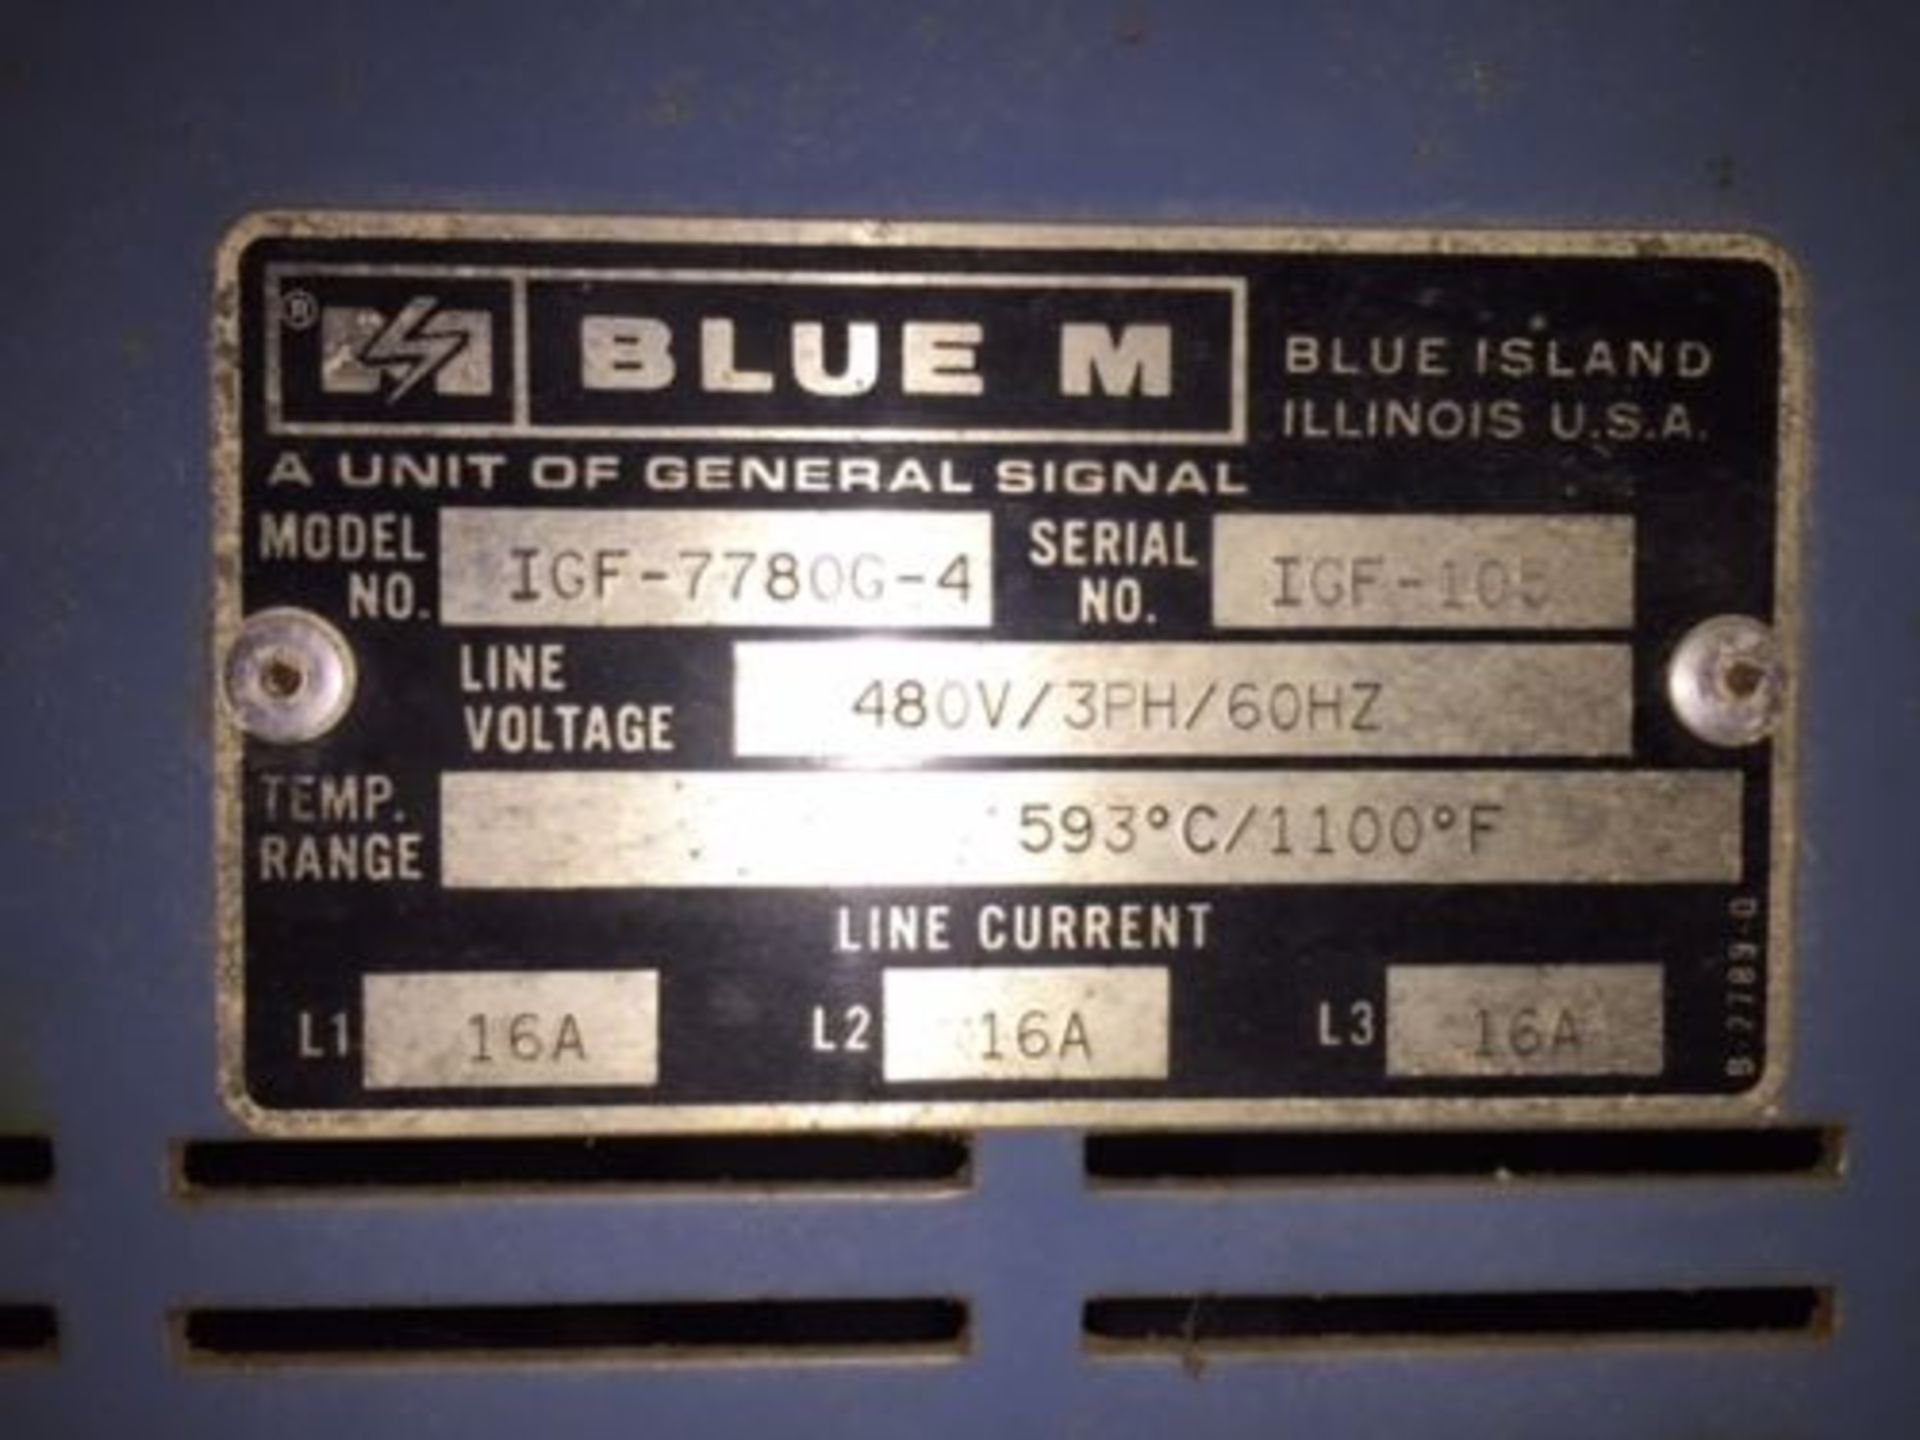 BLUE M 1100 F INERT ATMOSPHERE OVEN - Image 6 of 6